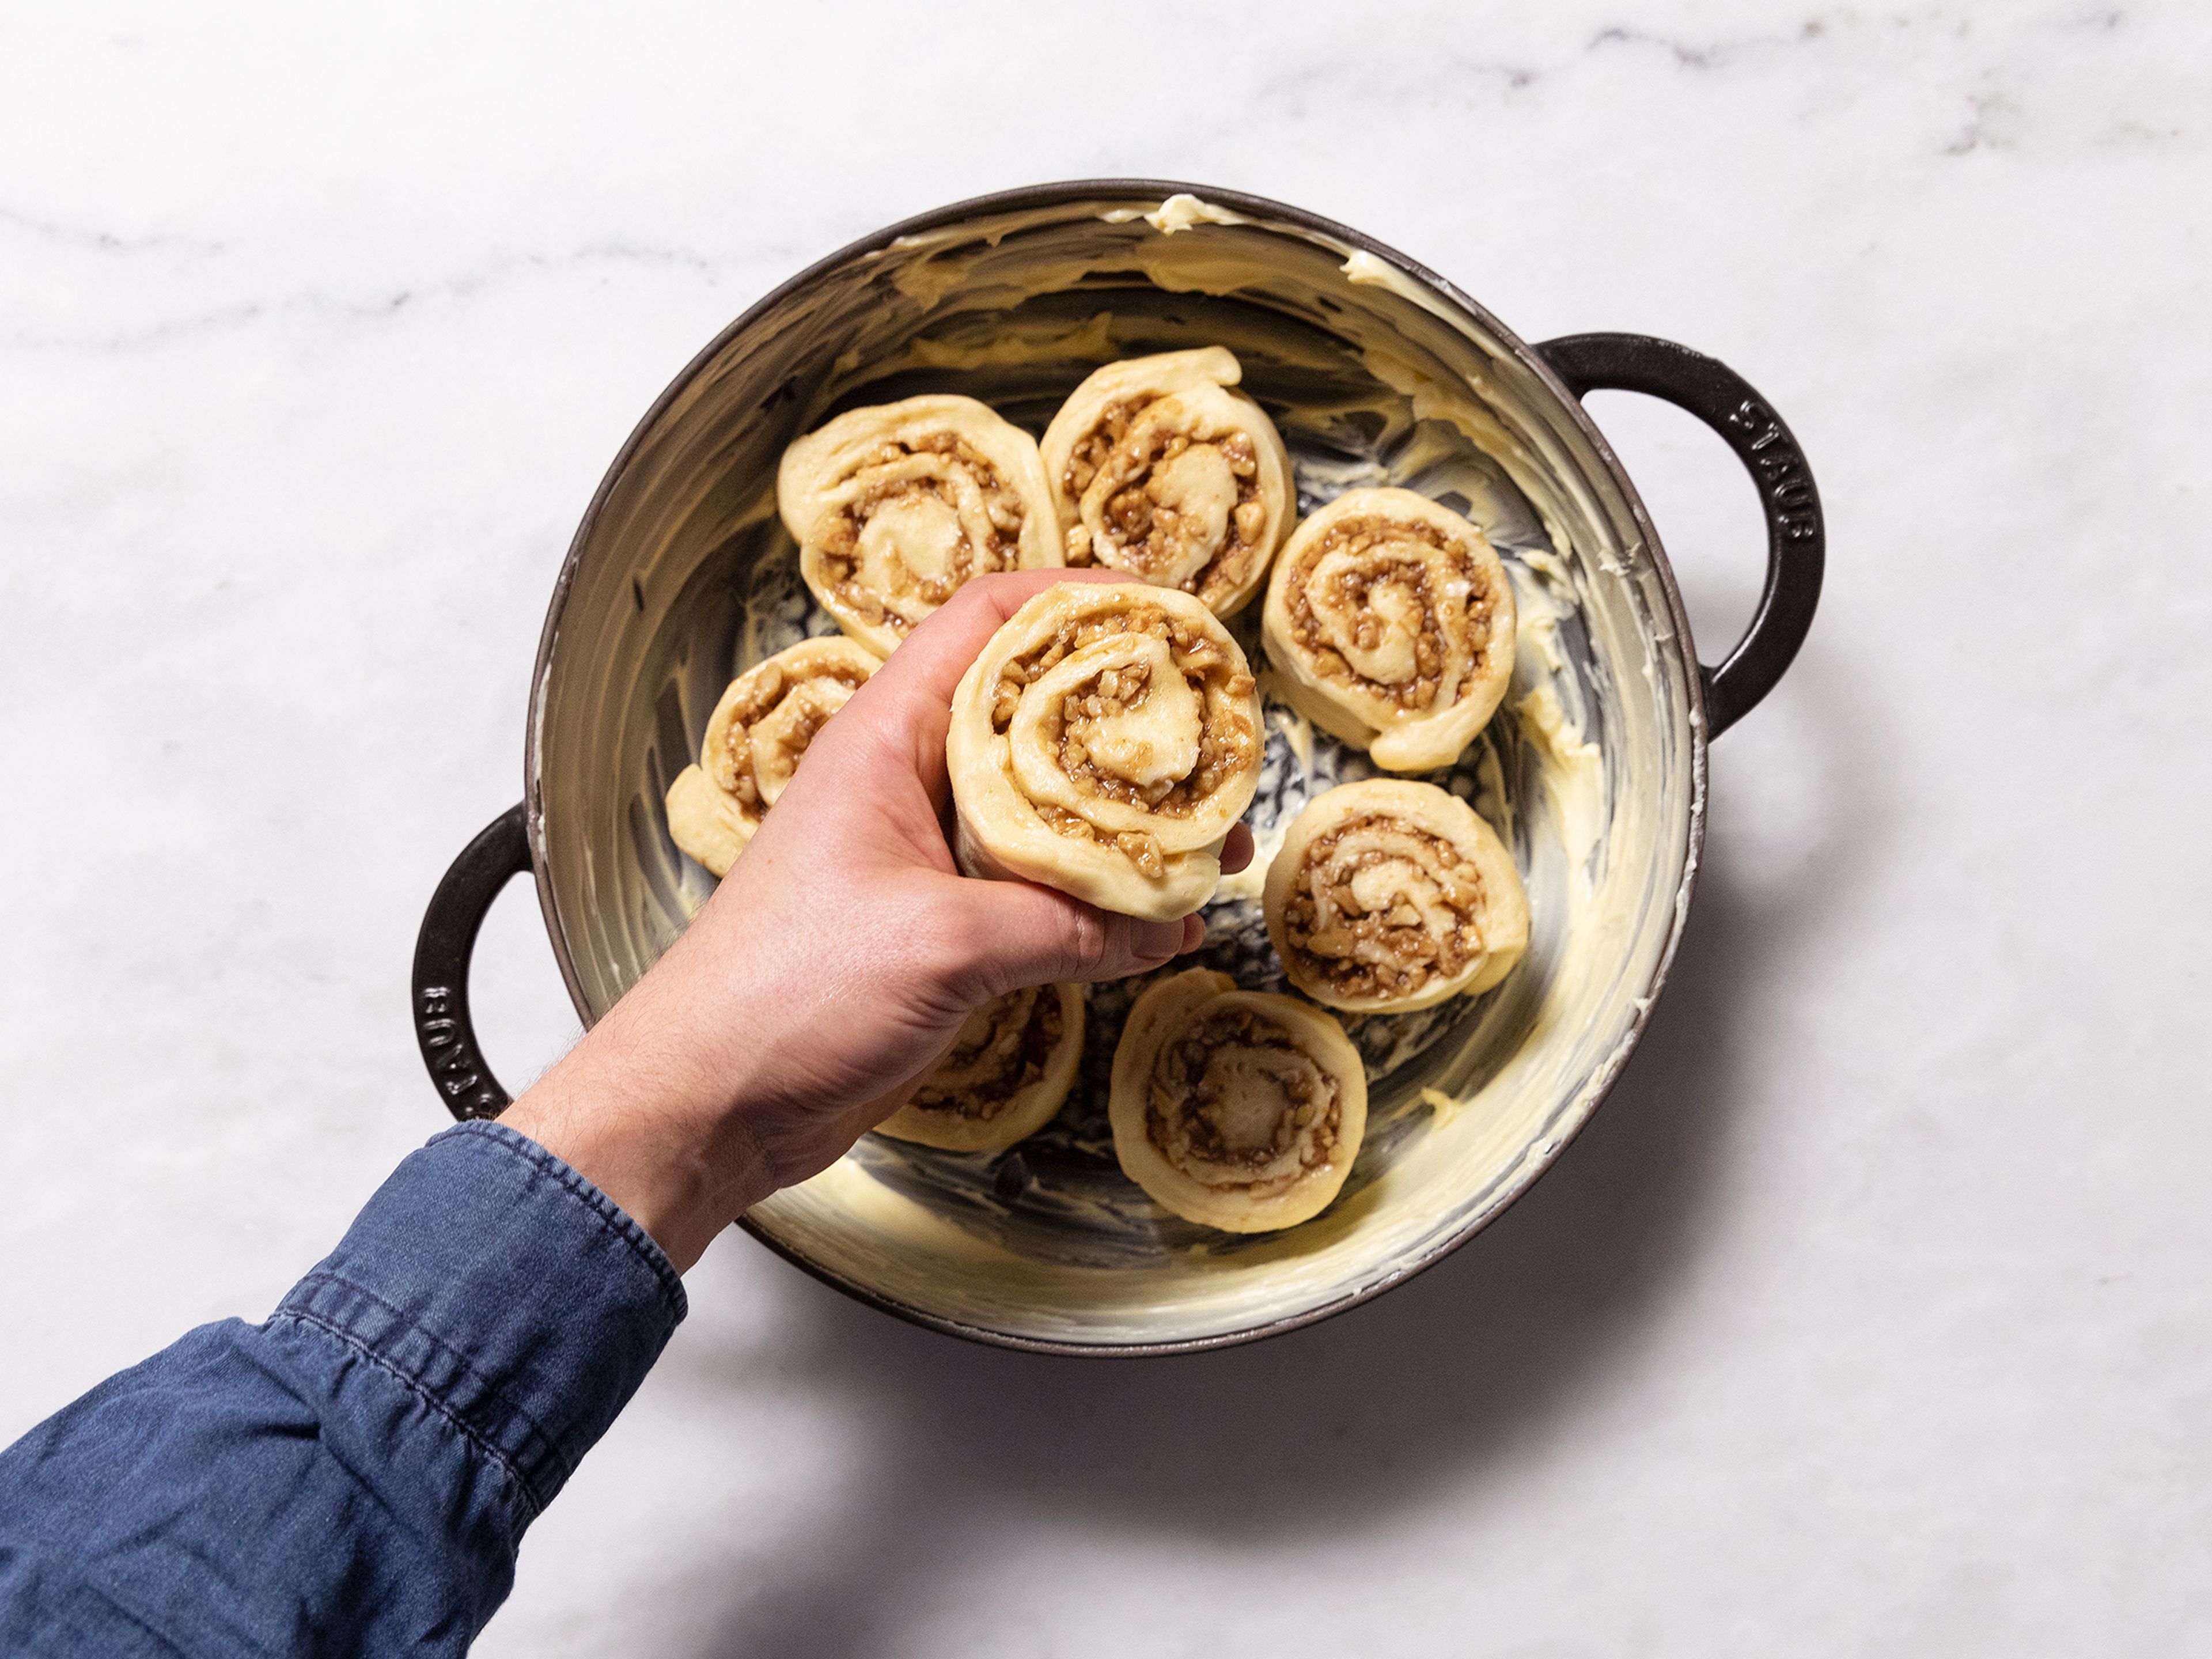 Tightly roll the pastry into a log along the longer edge. Cut the log in 8 equal-sized pieces. Transfer into a cast iron pot and allow to rise for approx. 45 min. more.